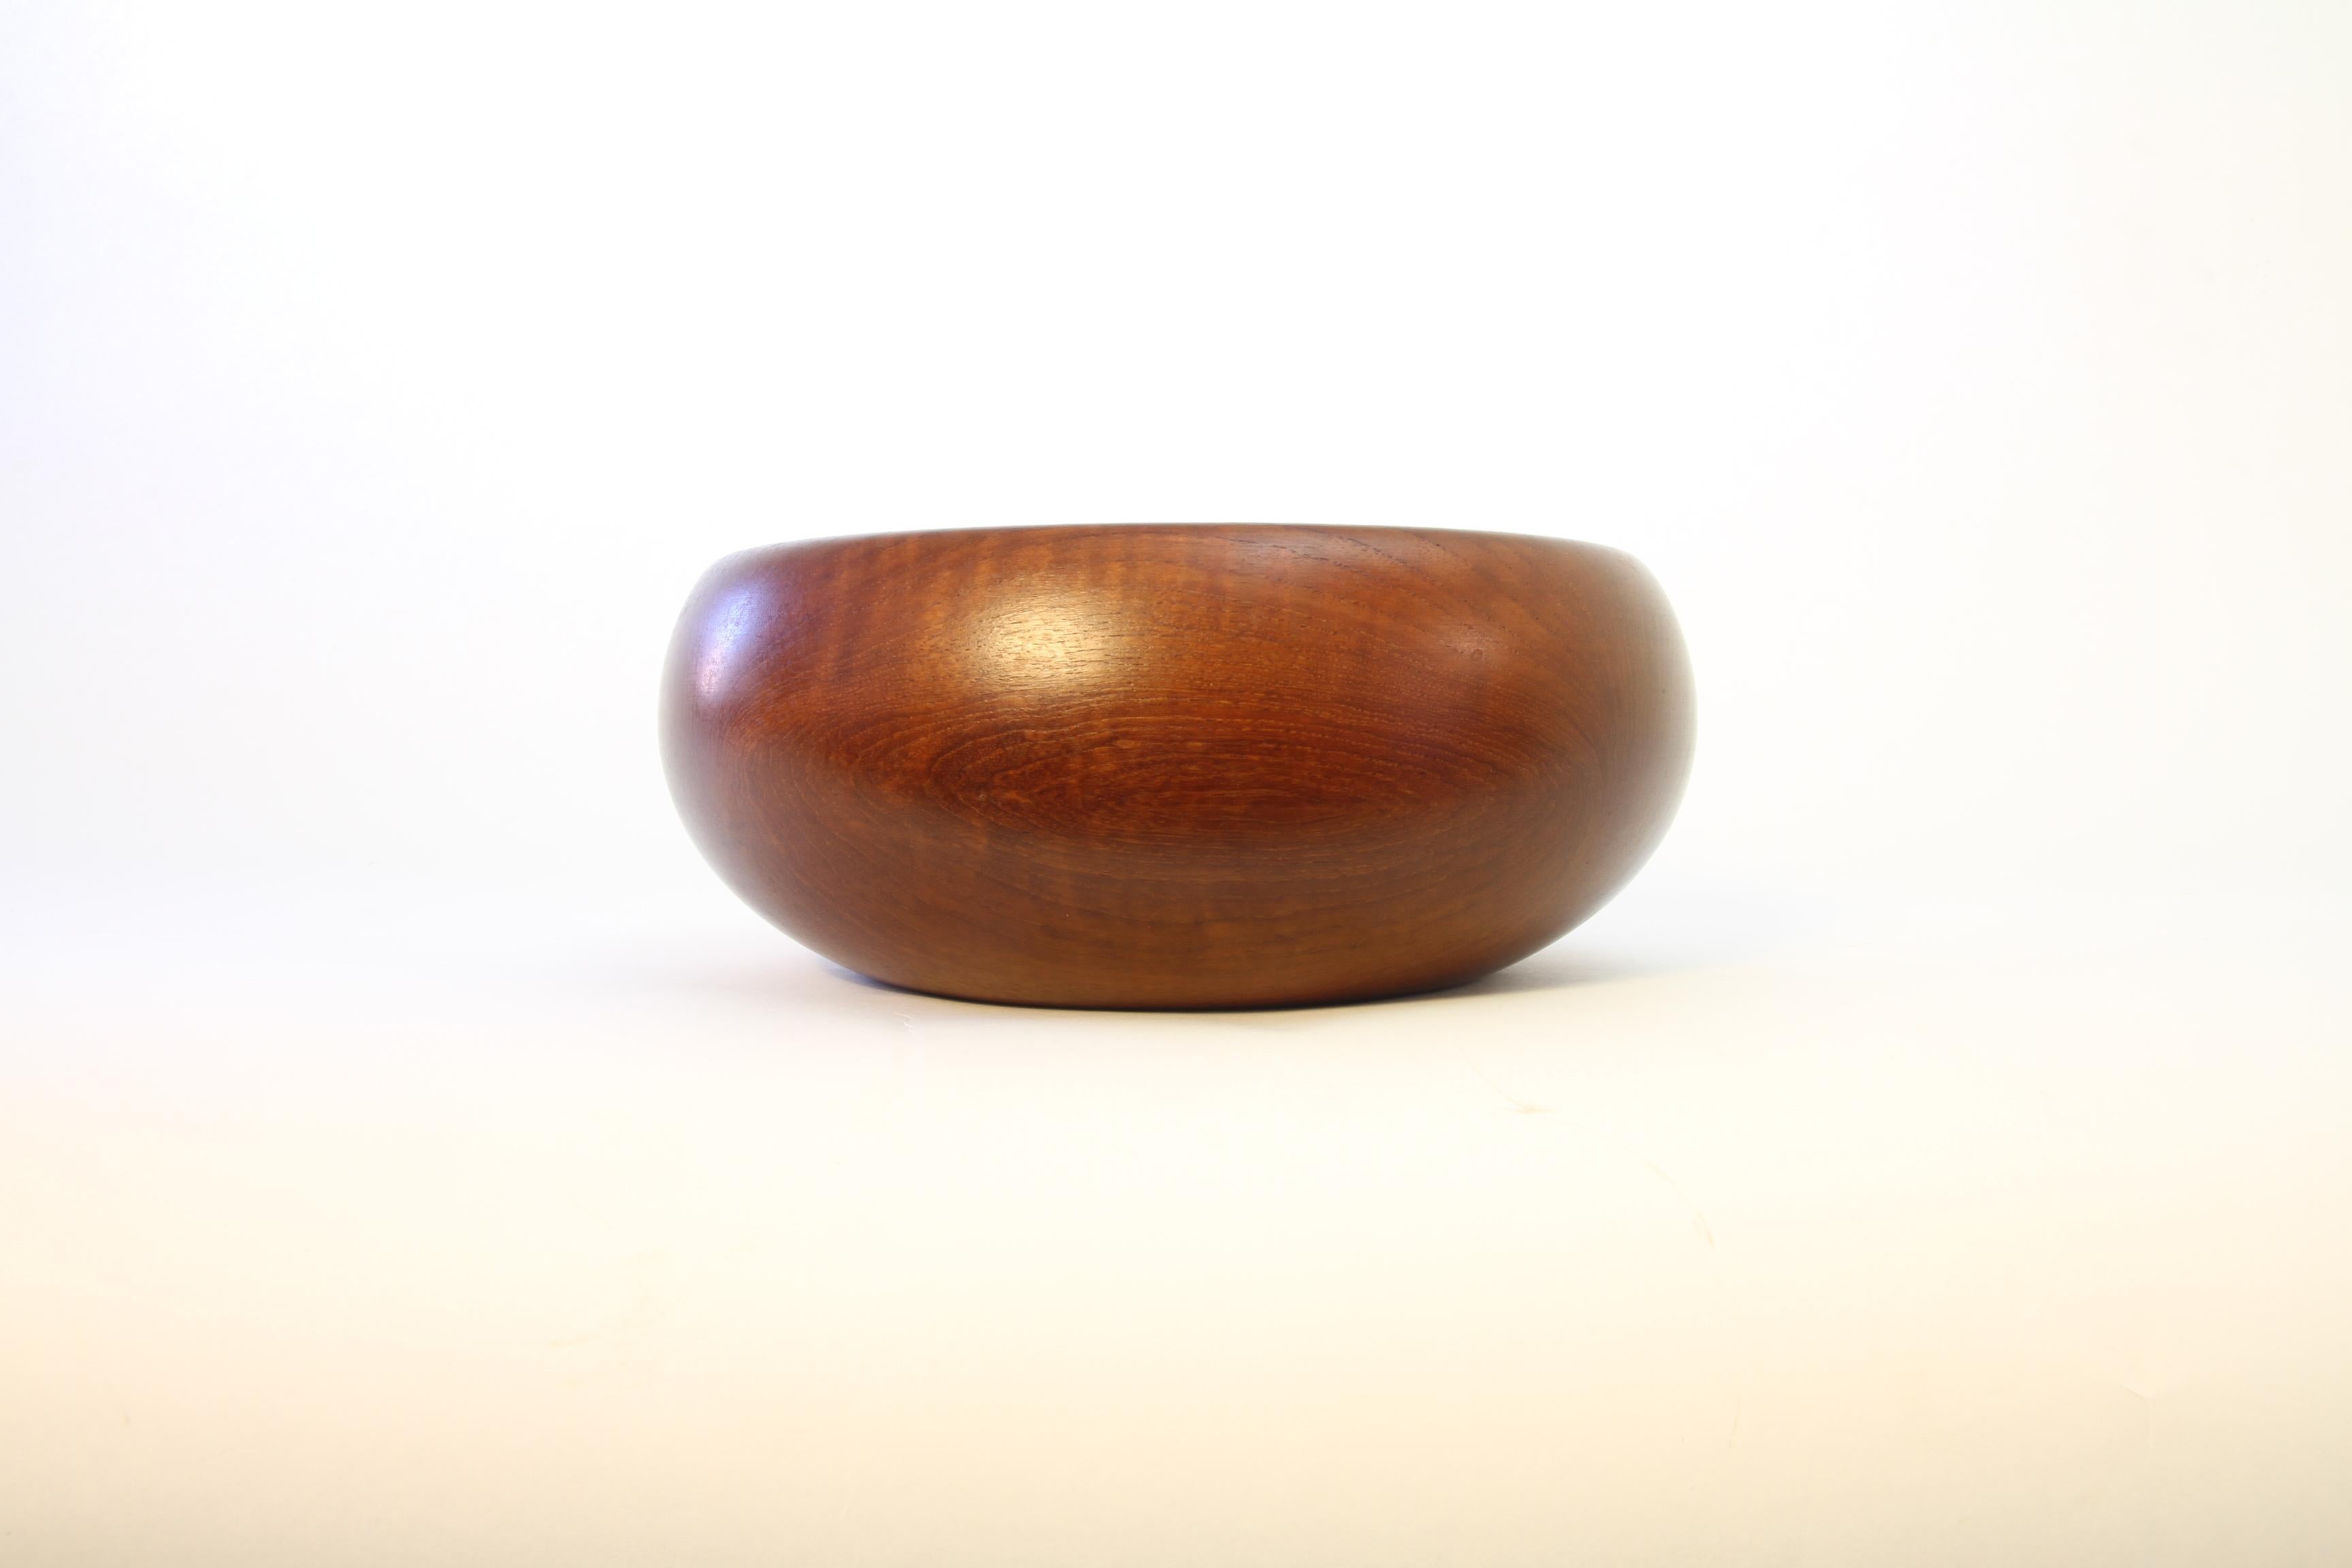 Beautiful organically shaped solid teak bowl made by Kay Bojesen in mint condition.